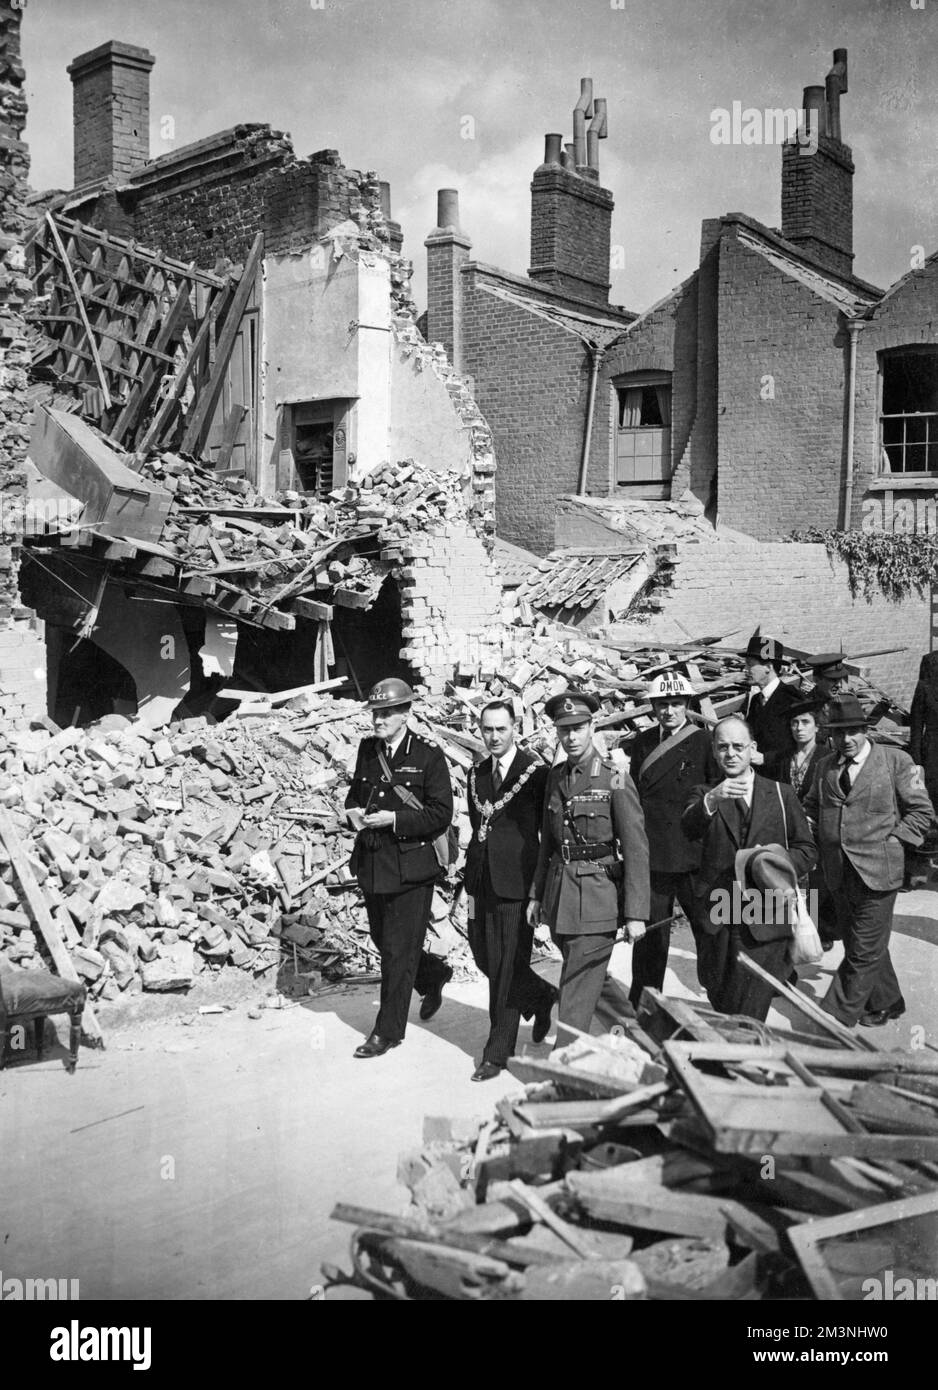 King George VI inspecting destroyed homes, part of the damage done by German air raids over London during the Blitz.       Date: 1940 Stock Photo